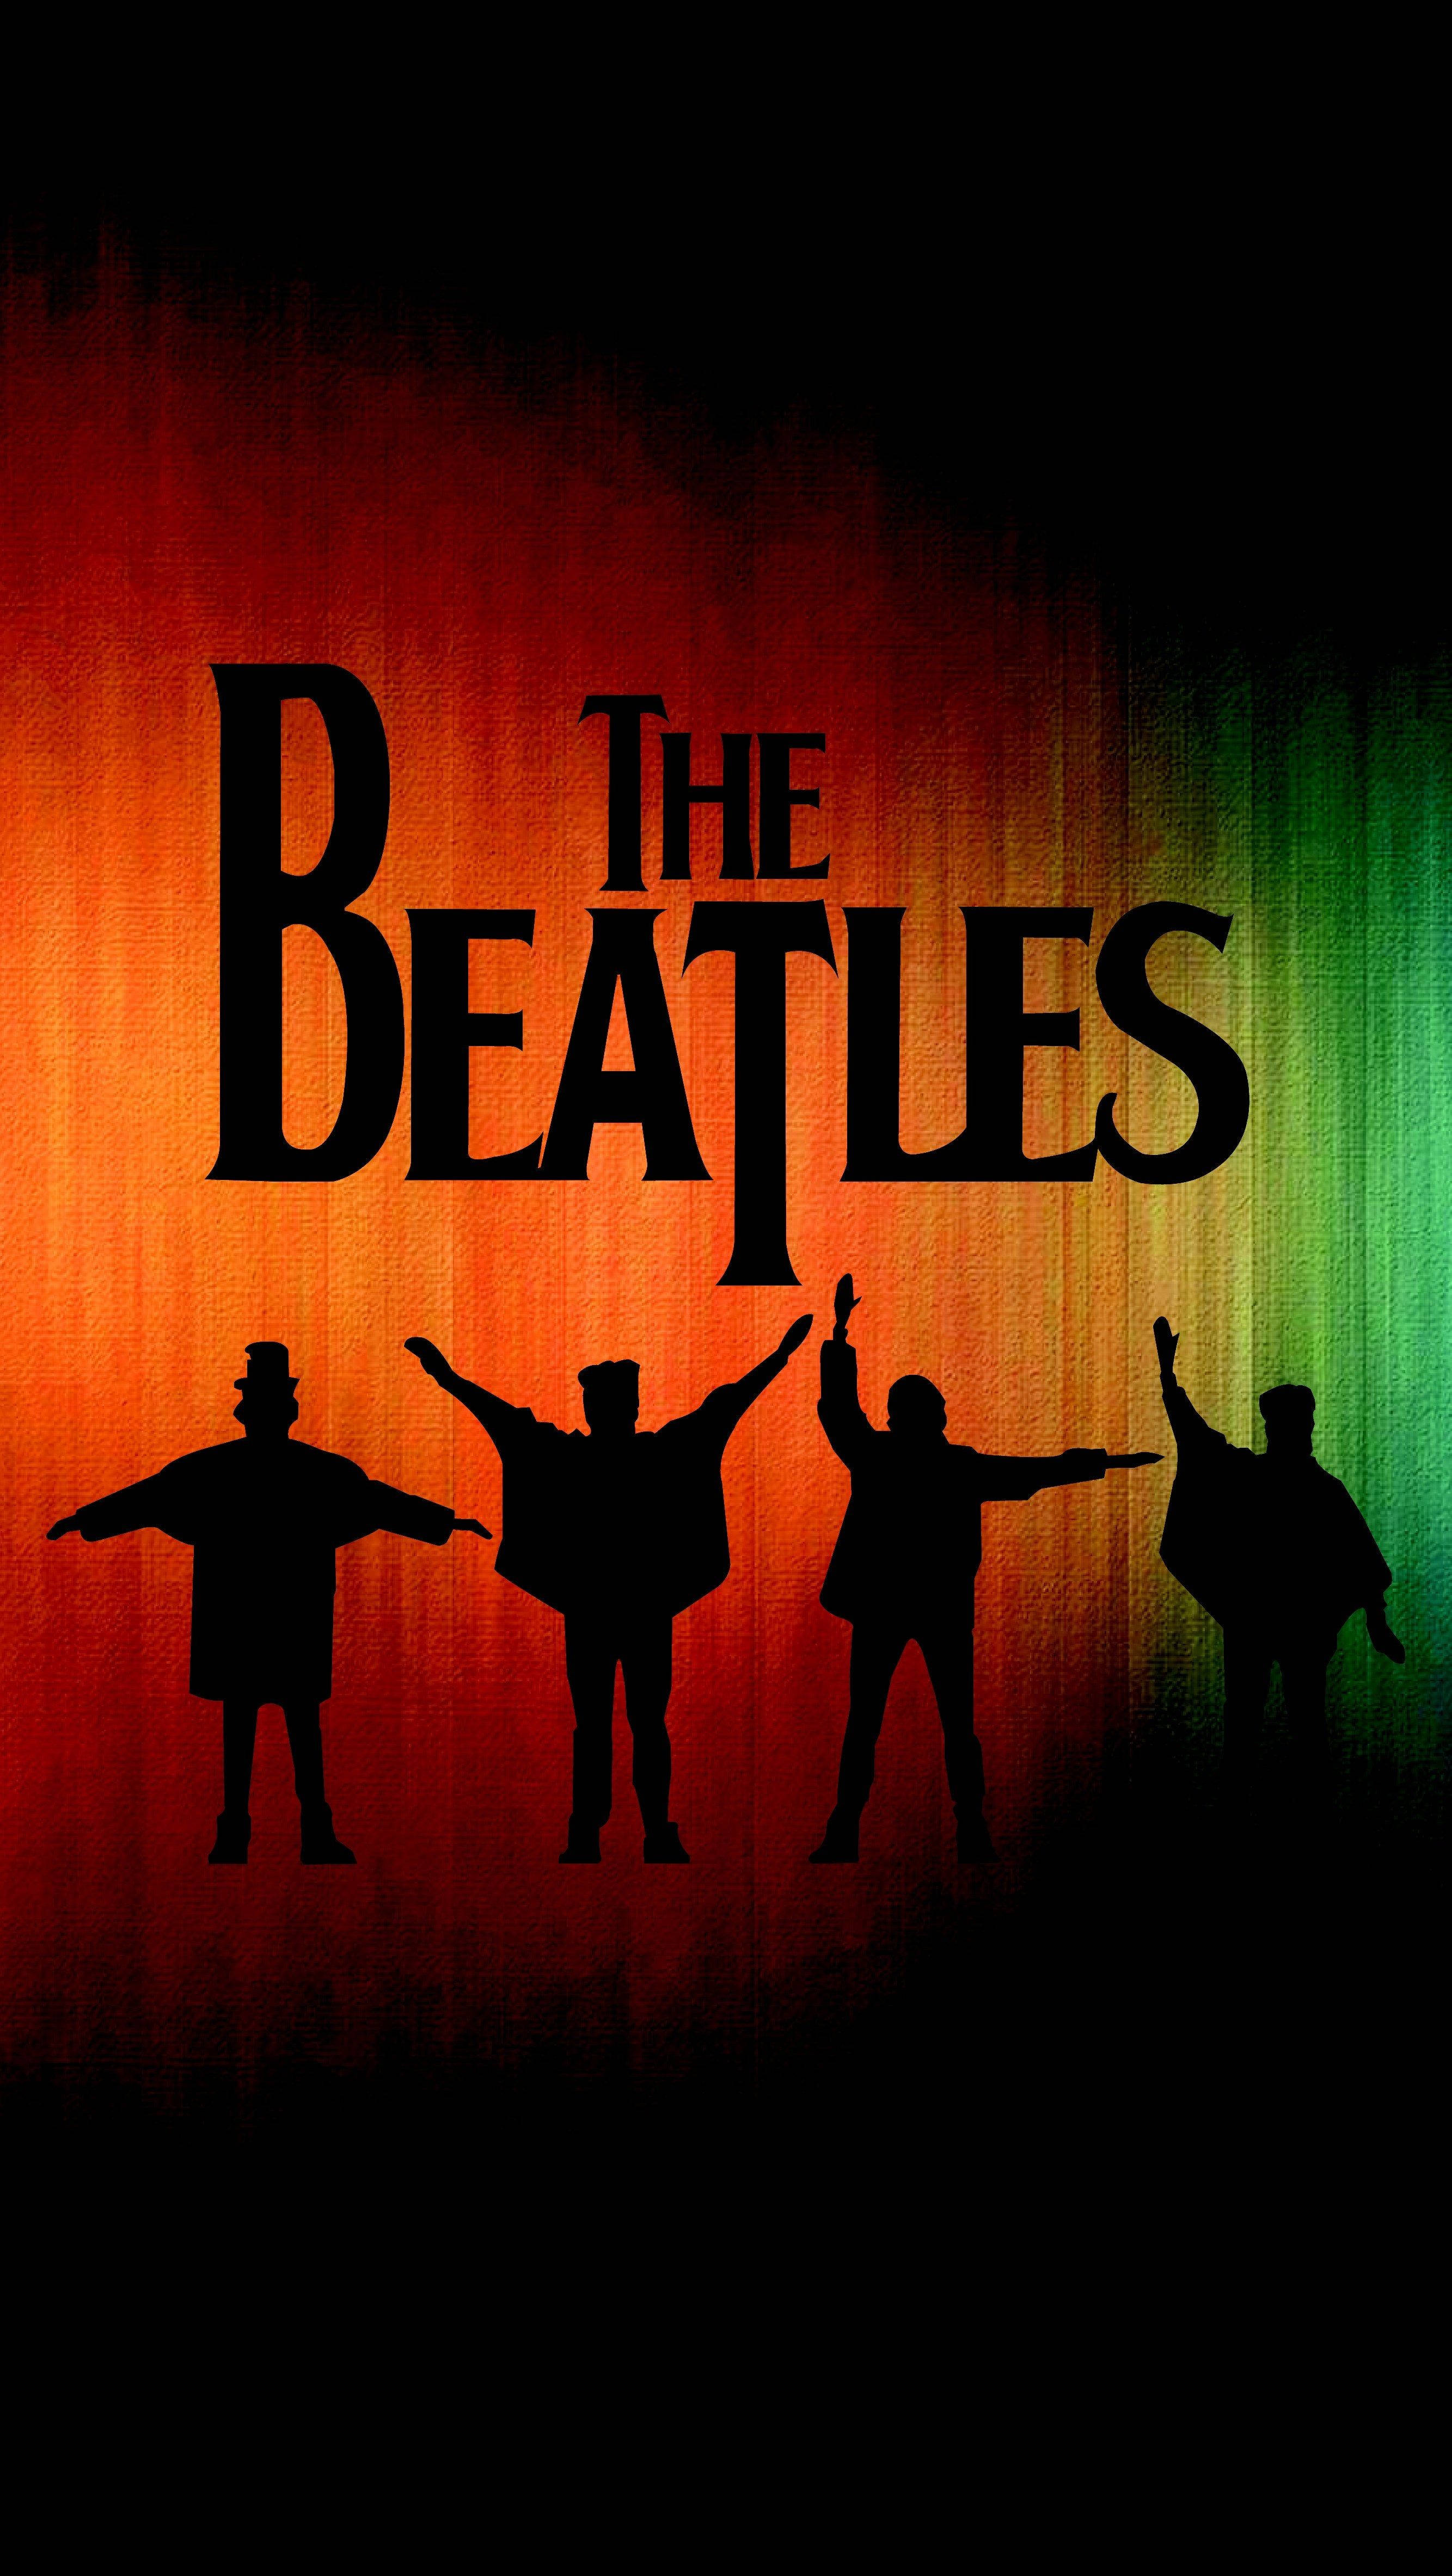 How The Beatles got their logo | Beatles Archive